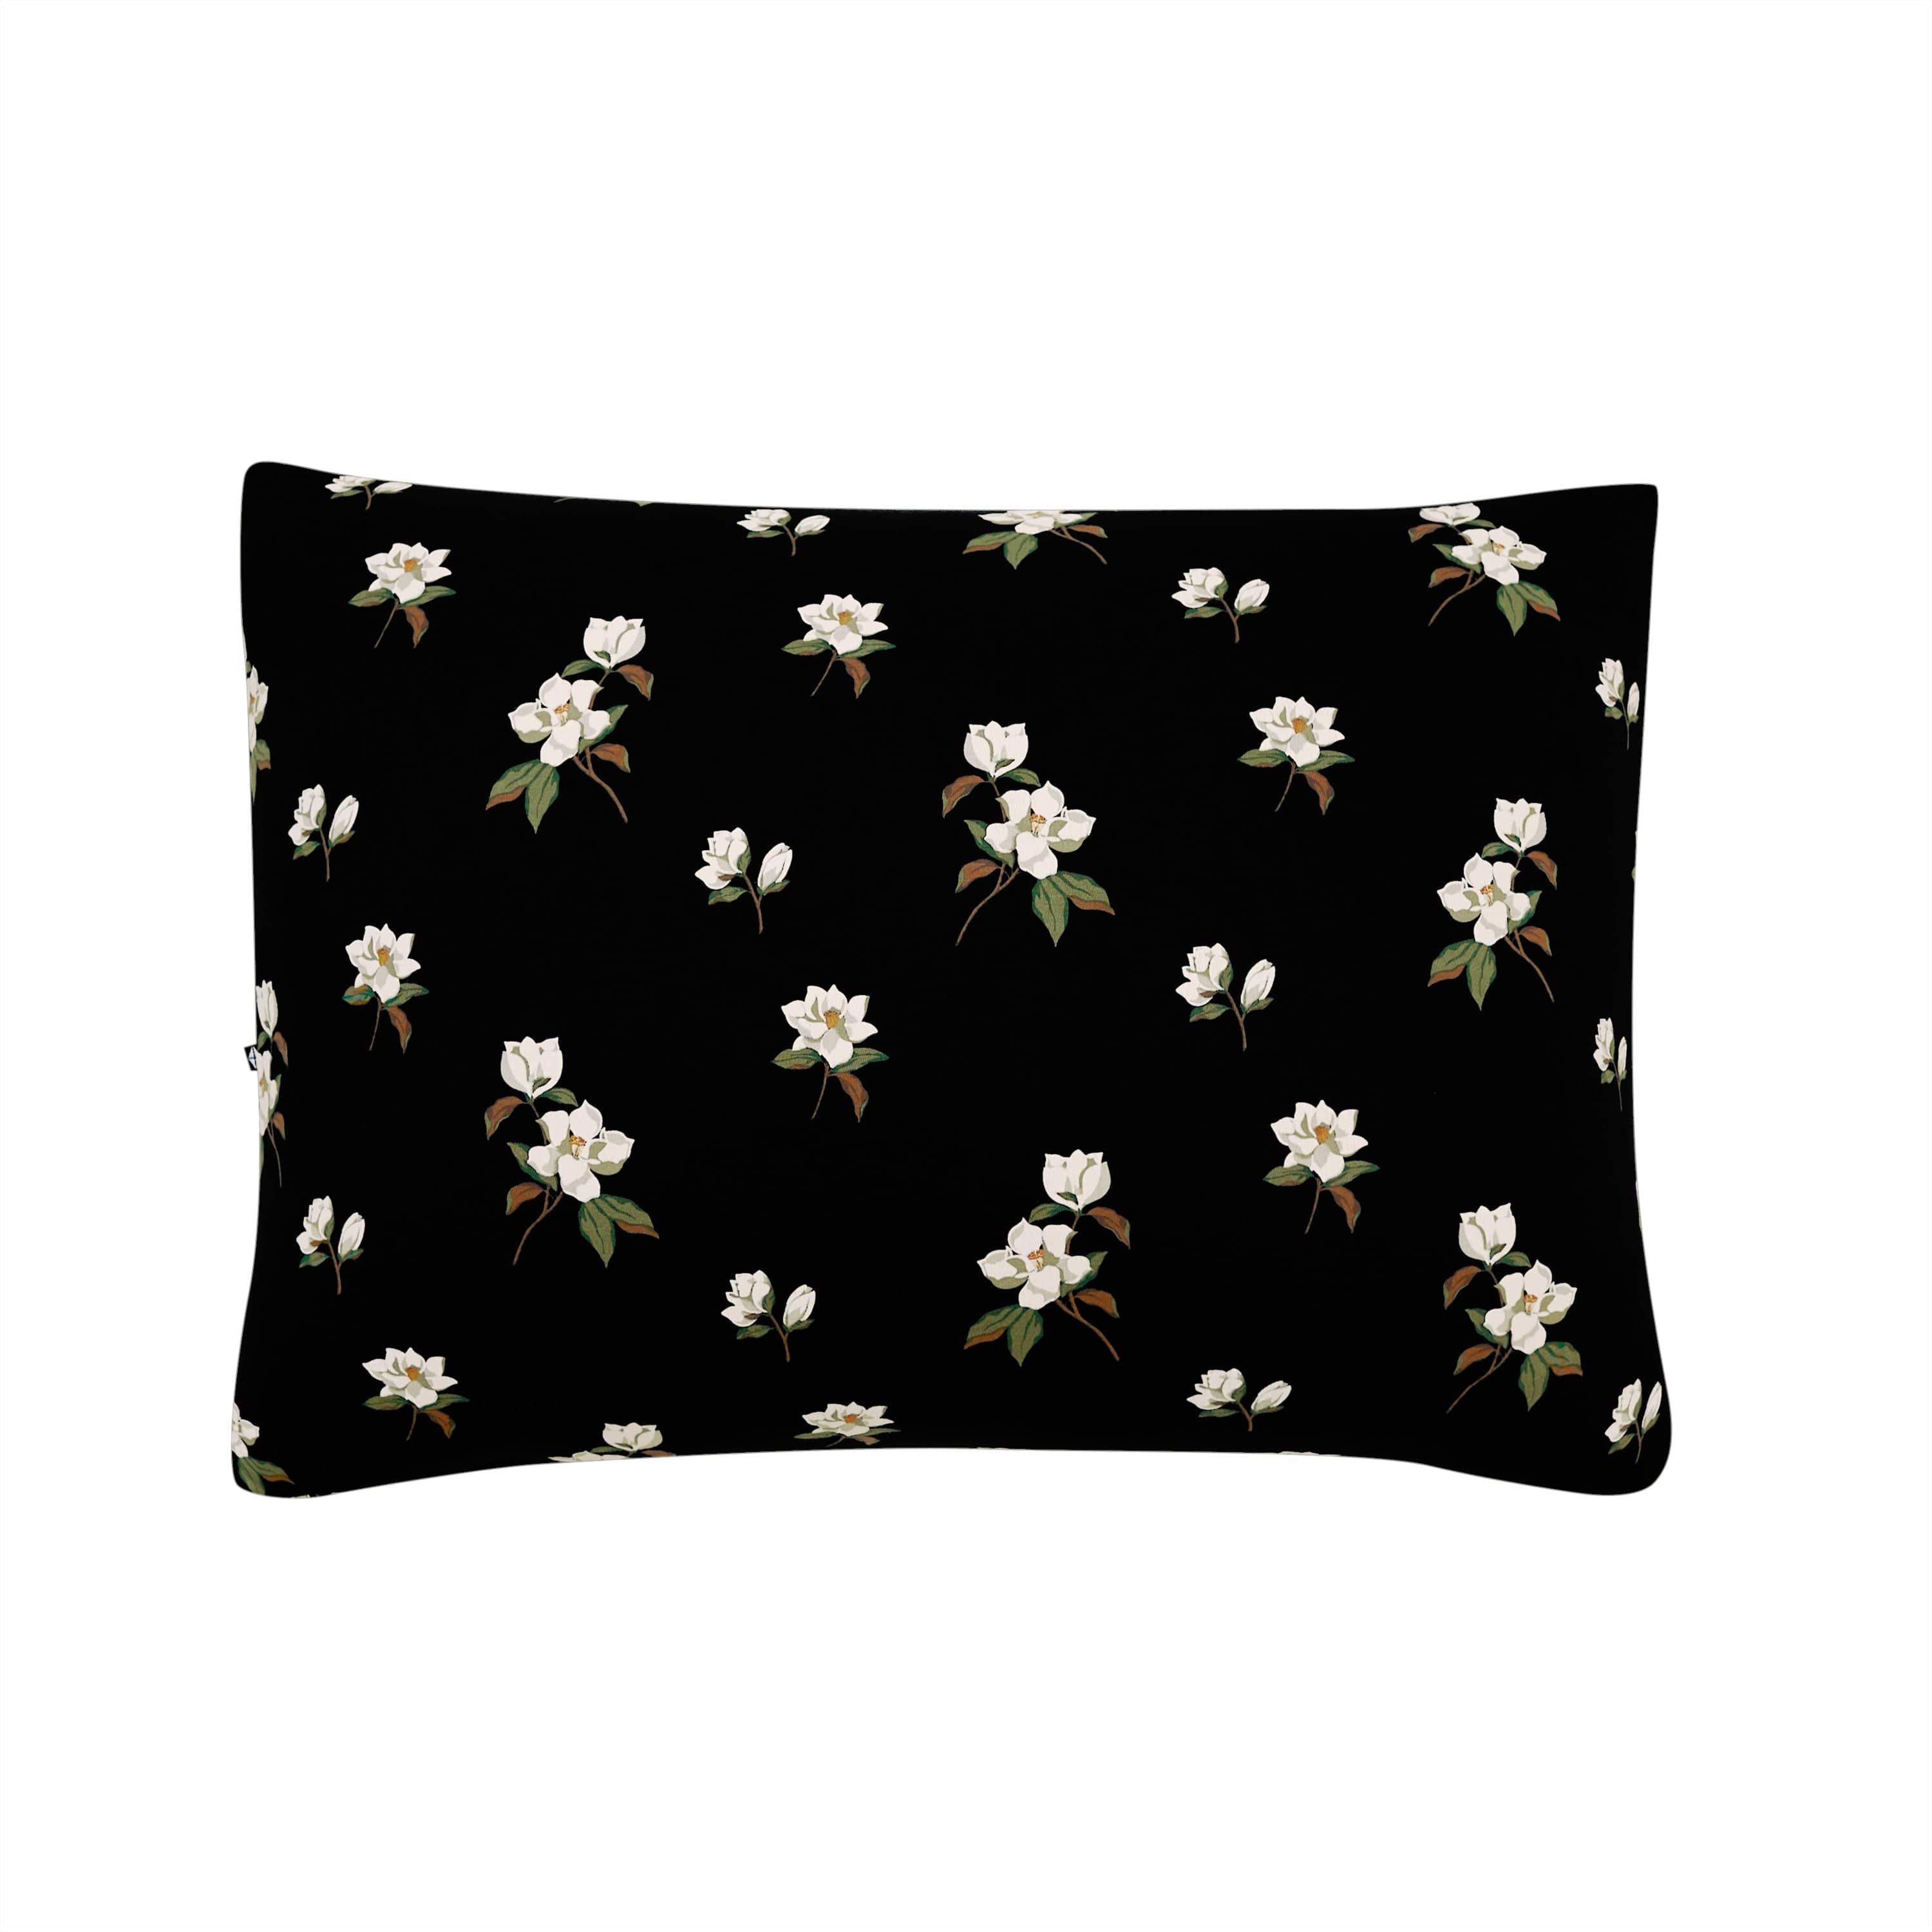 Kyte Baby Toddler Pillow Case Big Midnight Magnolia / Toddler Toddler Pillowcase in Big Midnight Magnolia